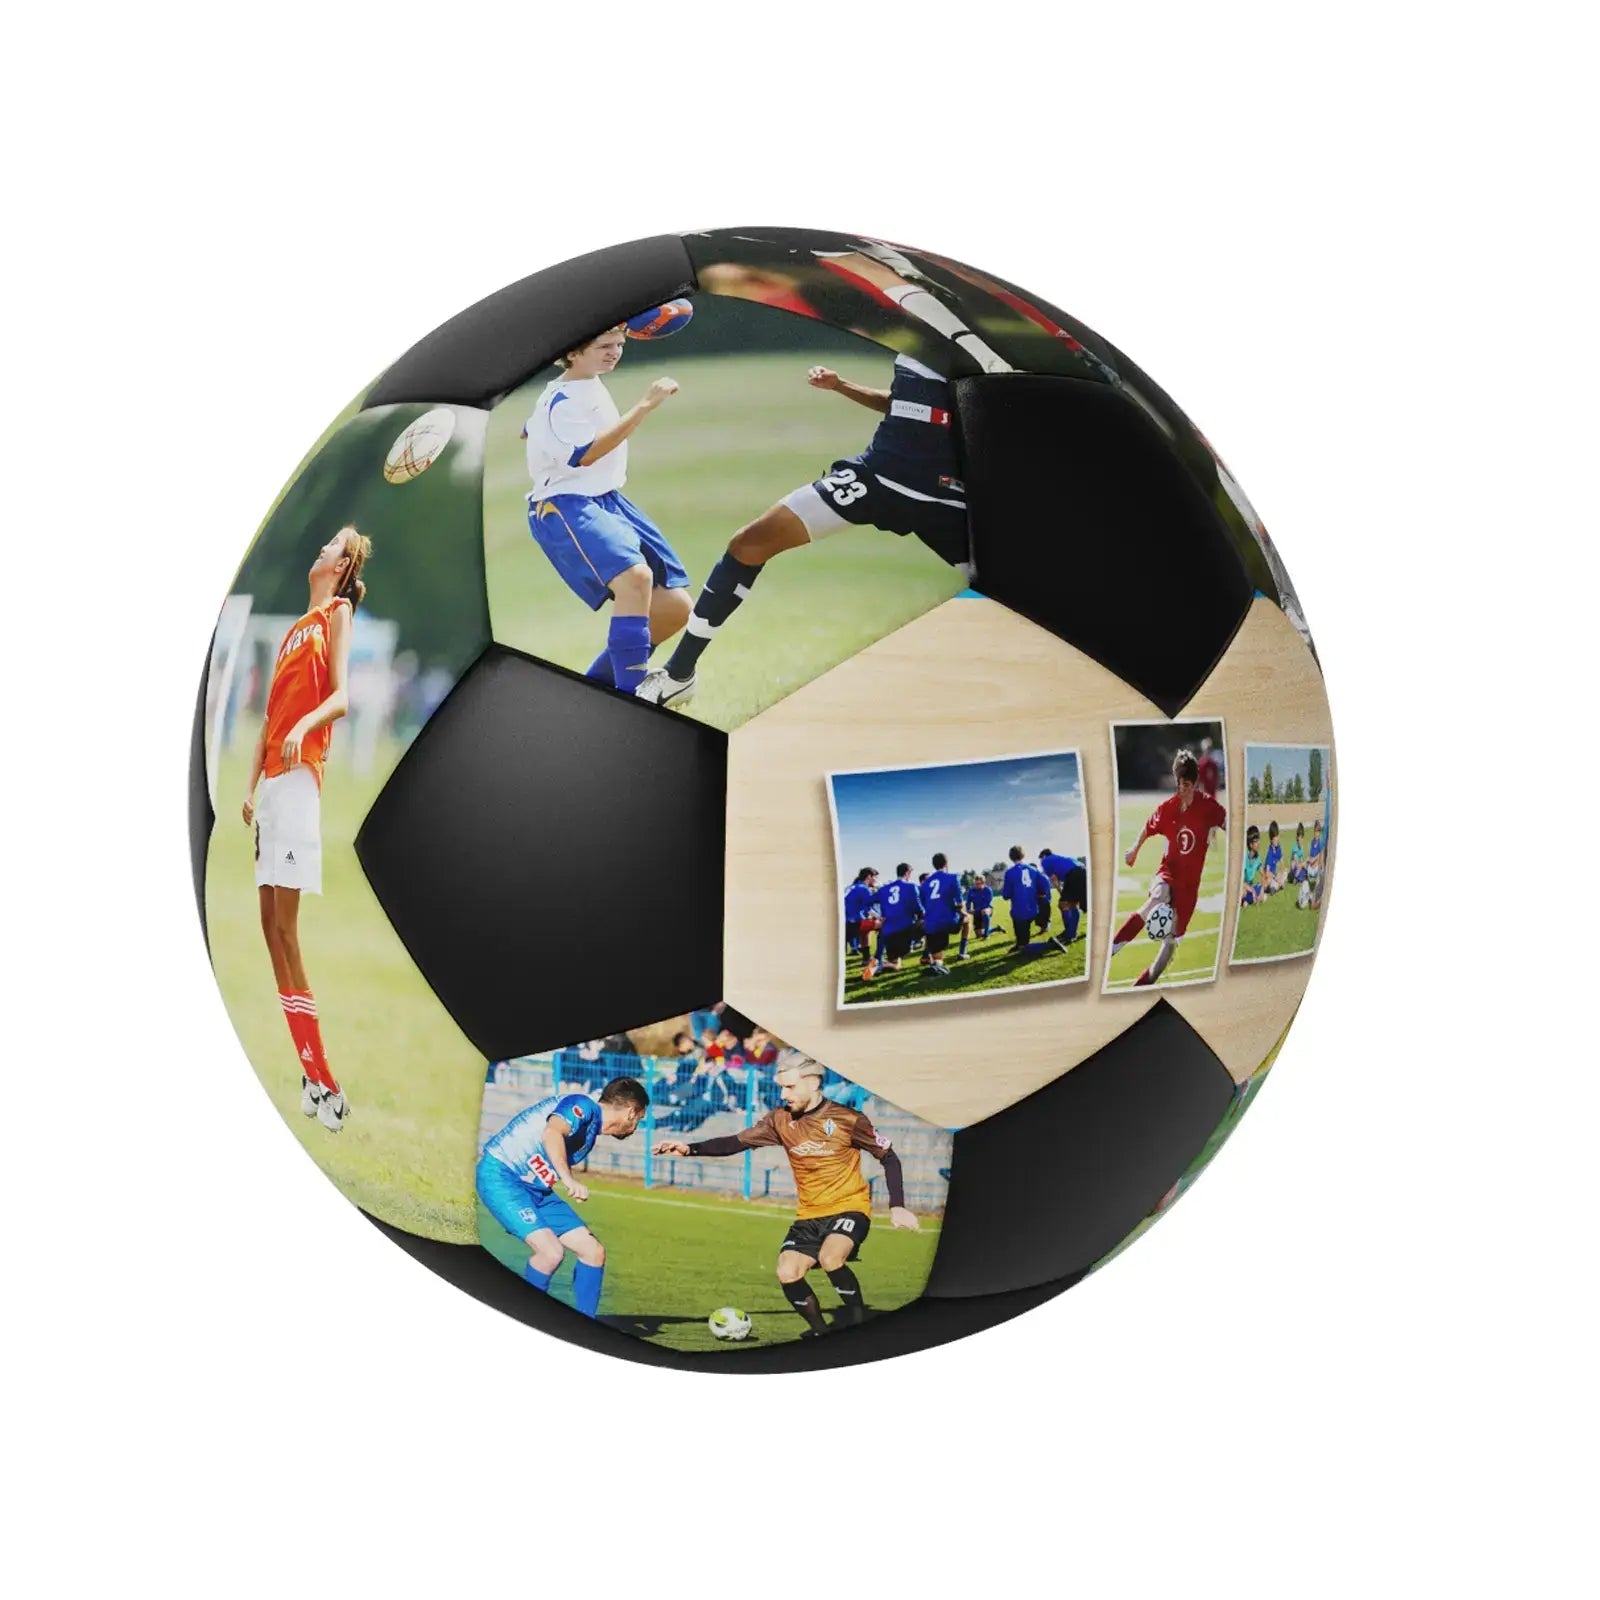 Personalized Custom Gift Soccer Ball For Child, No. 5 - Family Watchs